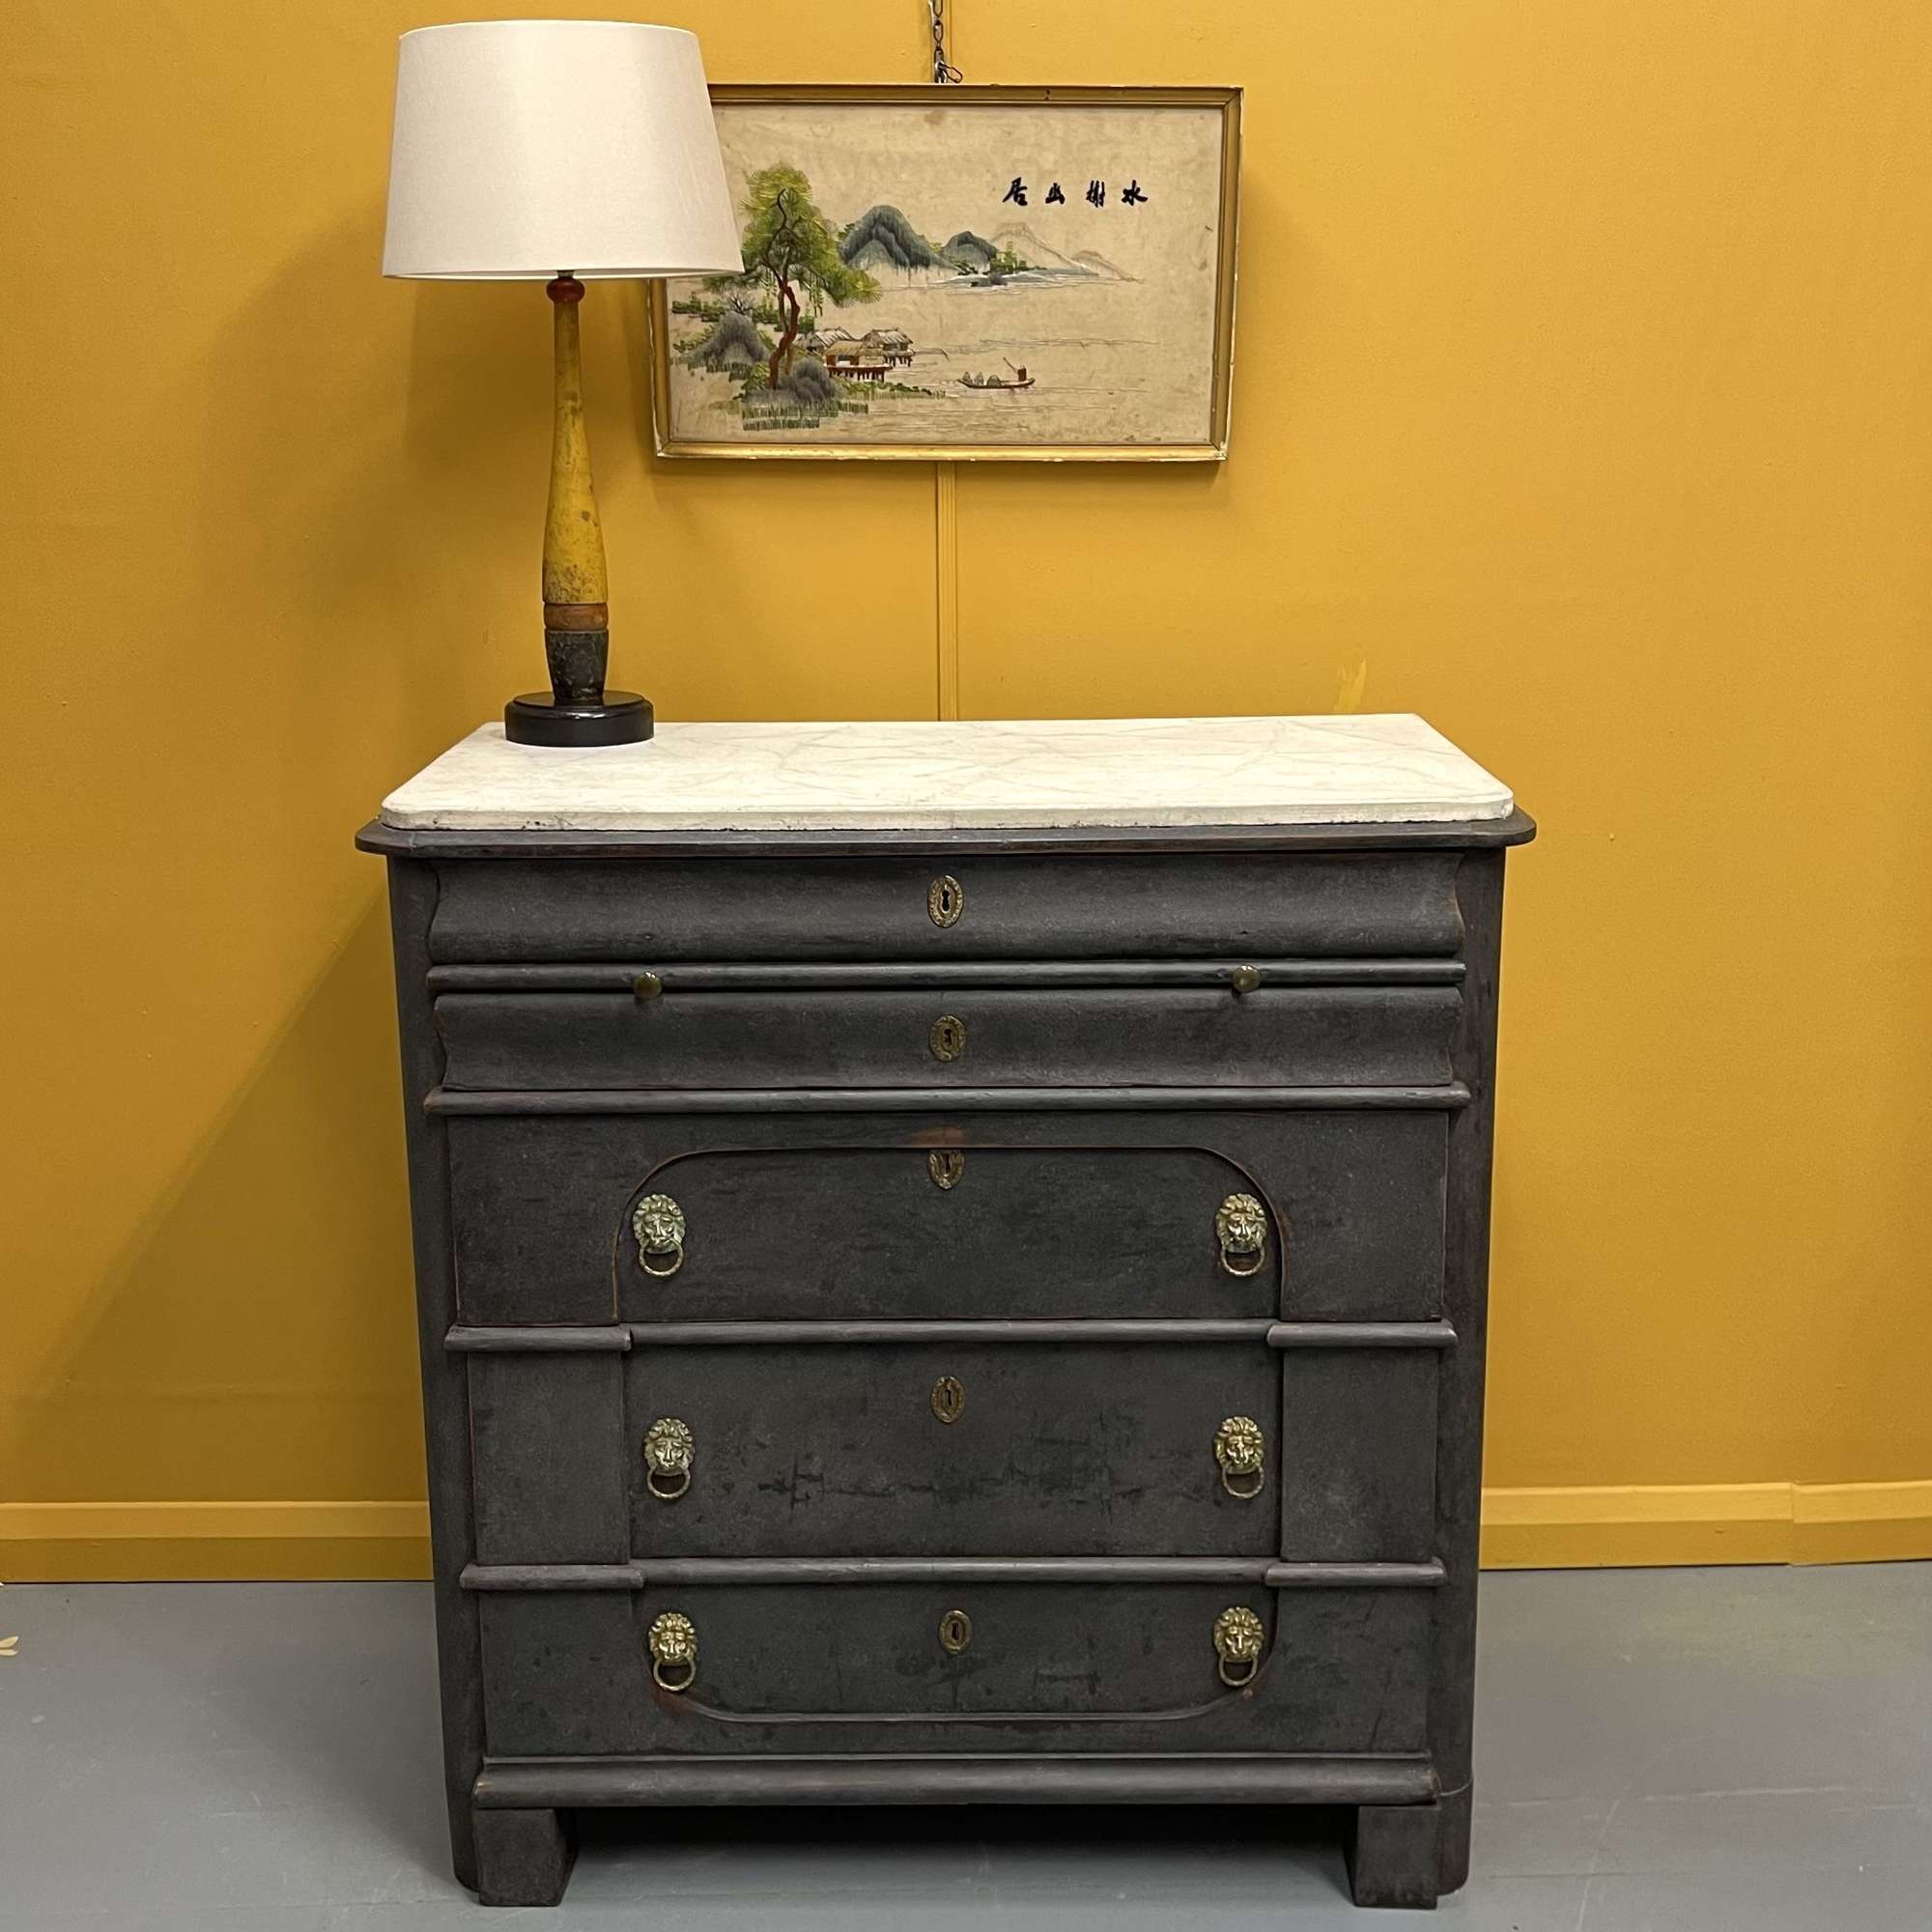 18th century Dutch painted chest of drawers